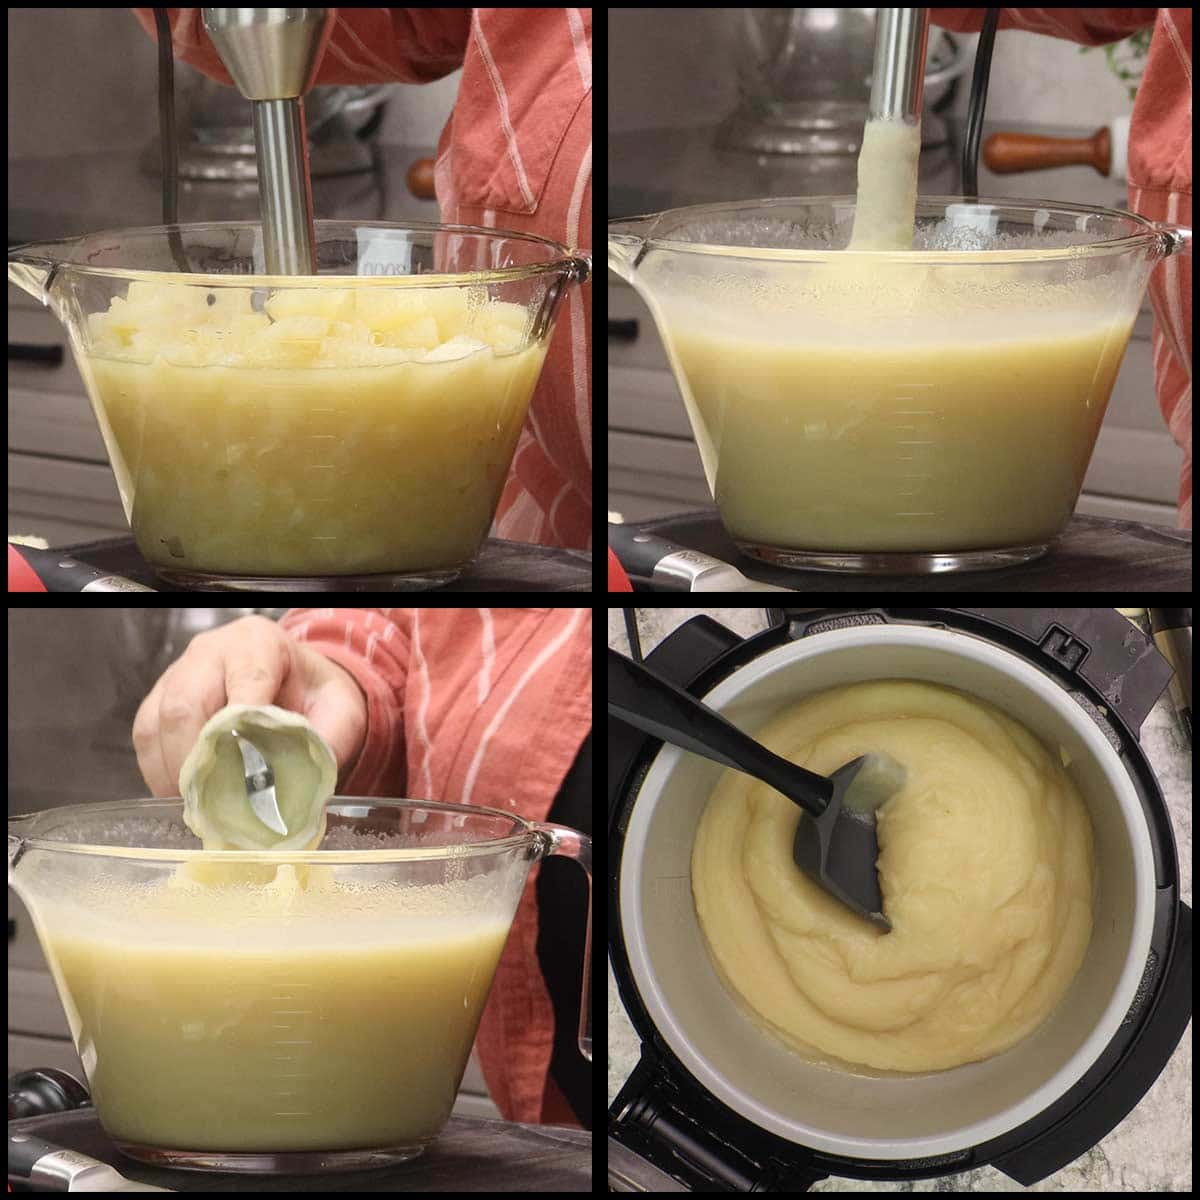 blending the potatoes with an immersion blender into a smooth puree.